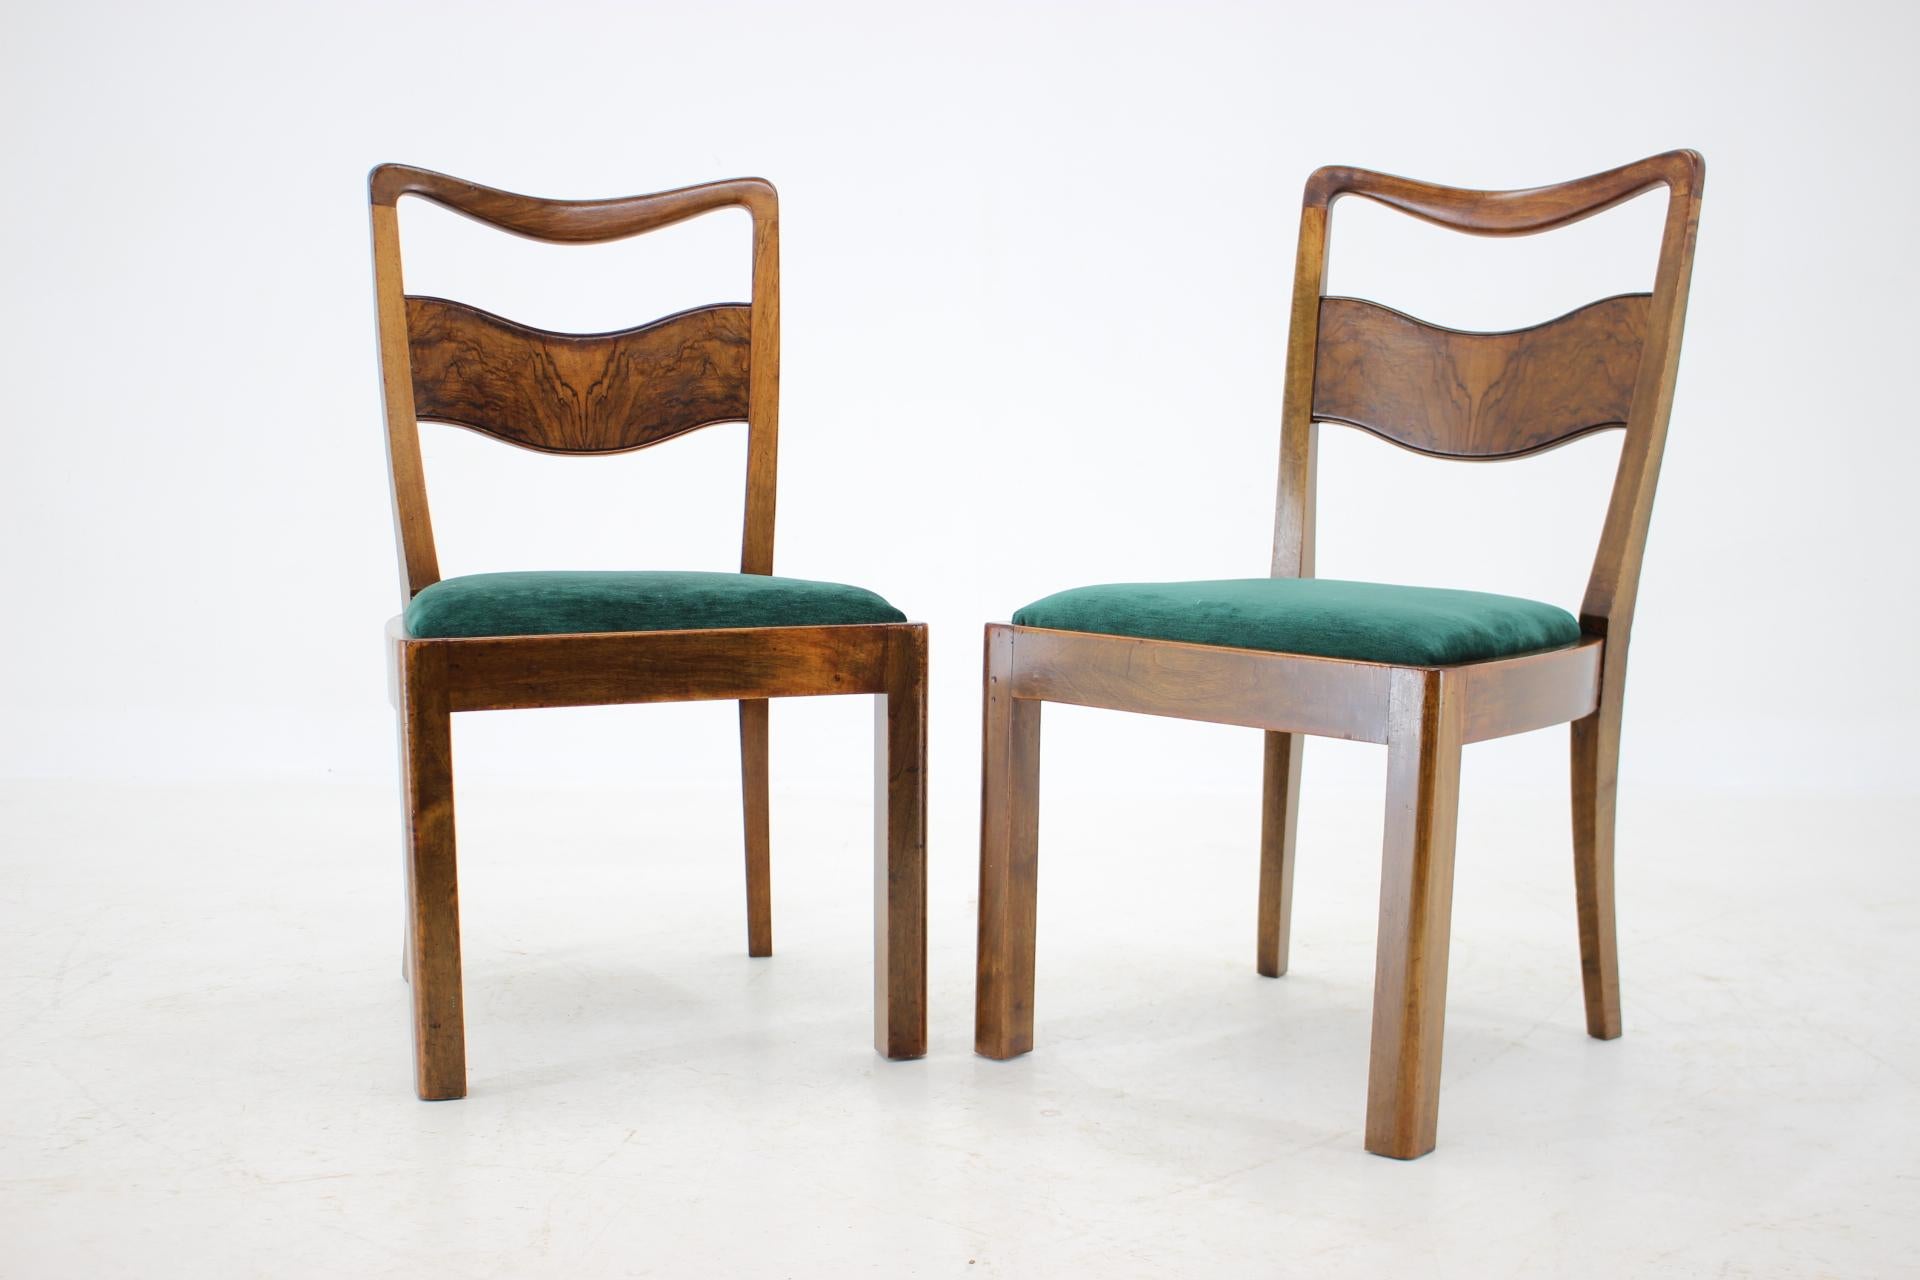 1930s Set of 4 Art Deco Dining Chairs, Czechoslovakia For Sale 1